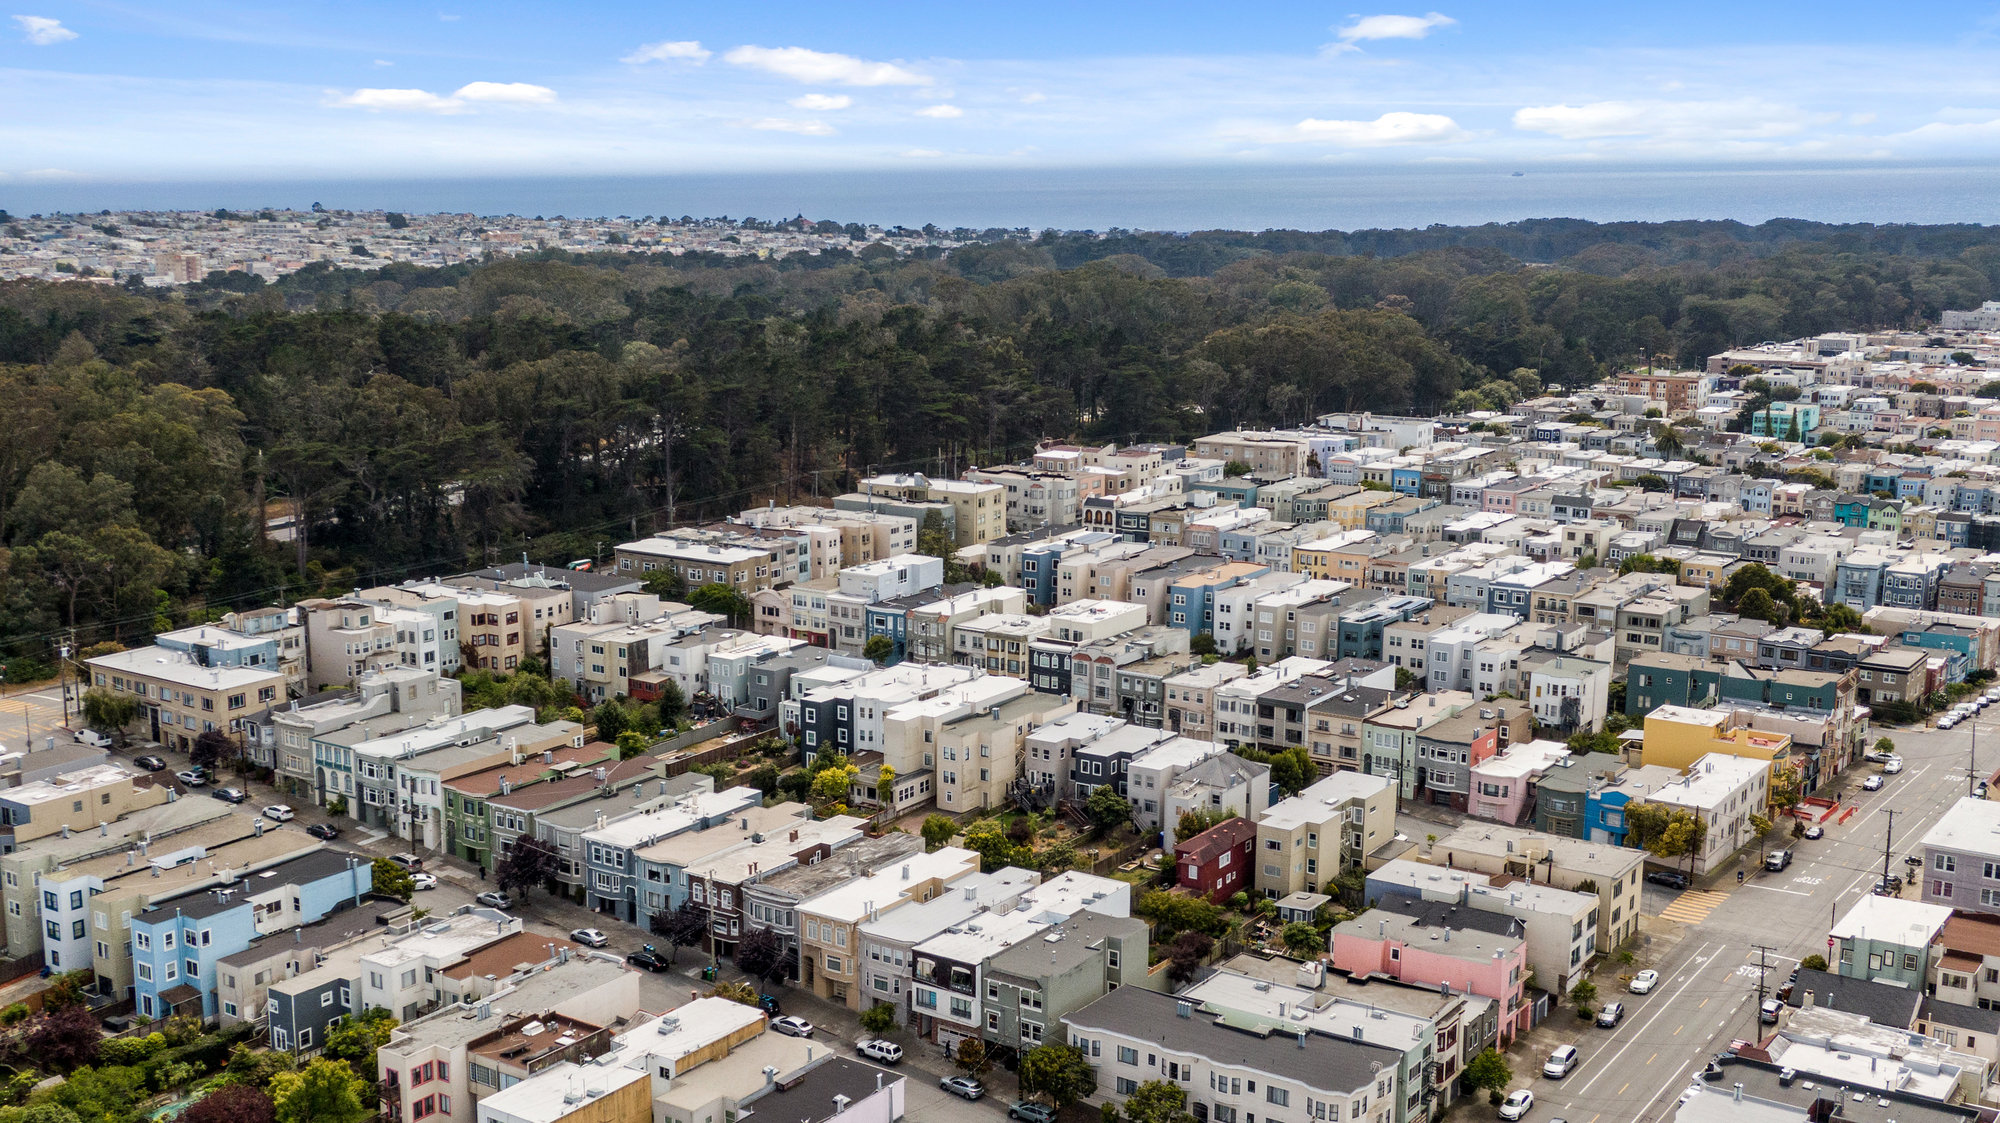 Property Photo: Aerial view of the Richmond District, Golden Gate Park and Ocean Beach as seen from 719 18th Avenue